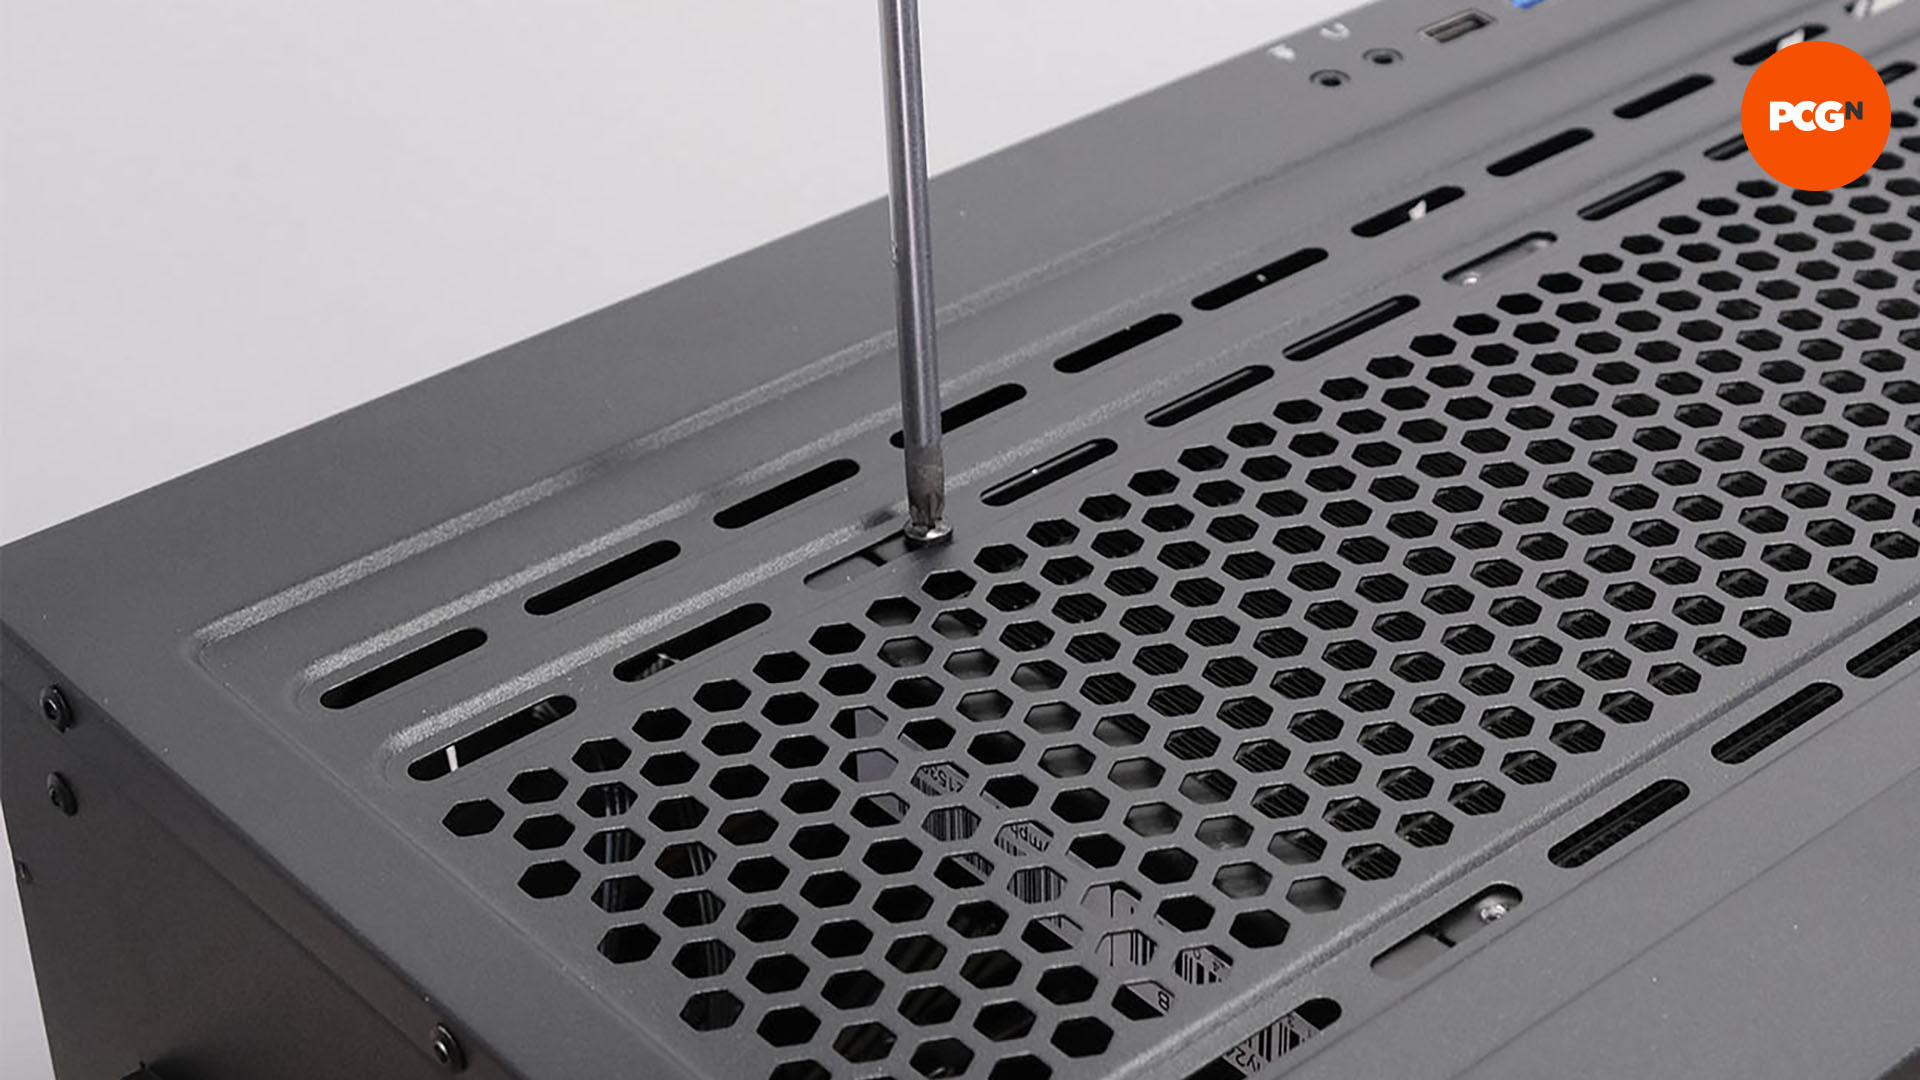 How to build a gaming PC: Screw radiator into case